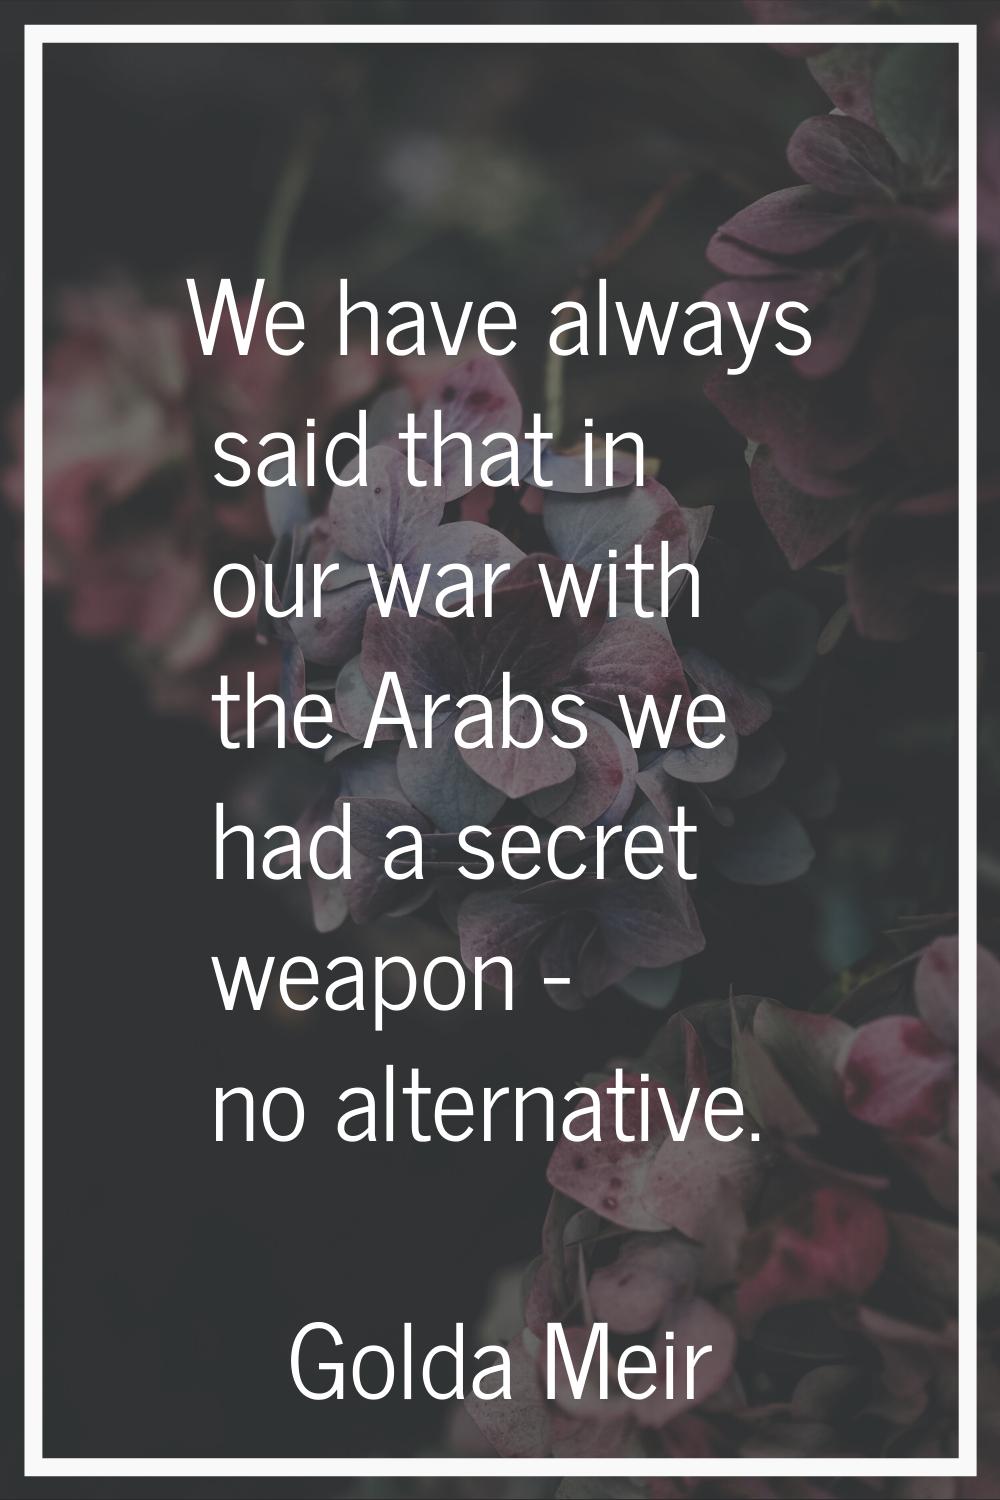 We have always said that in our war with the Arabs we had a secret weapon - no alternative.